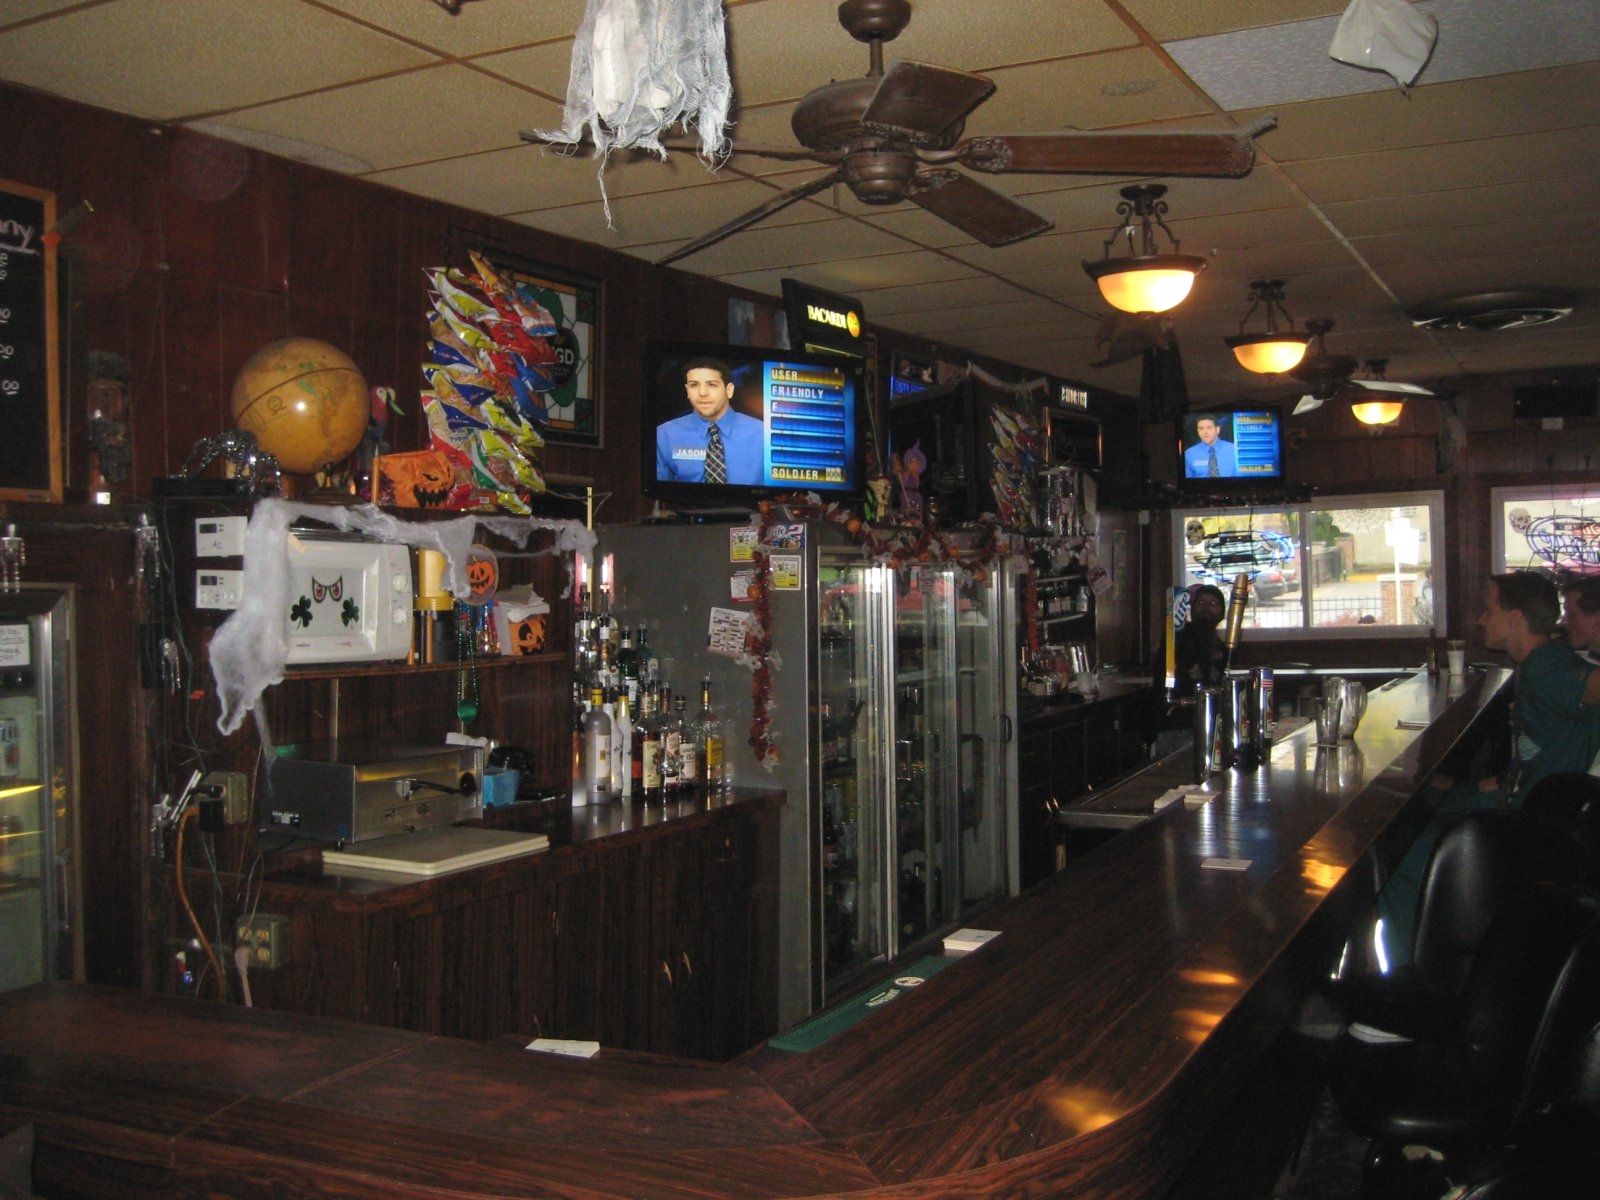 The bar at the Harp and Shamrock. Photo by Michael Horne.